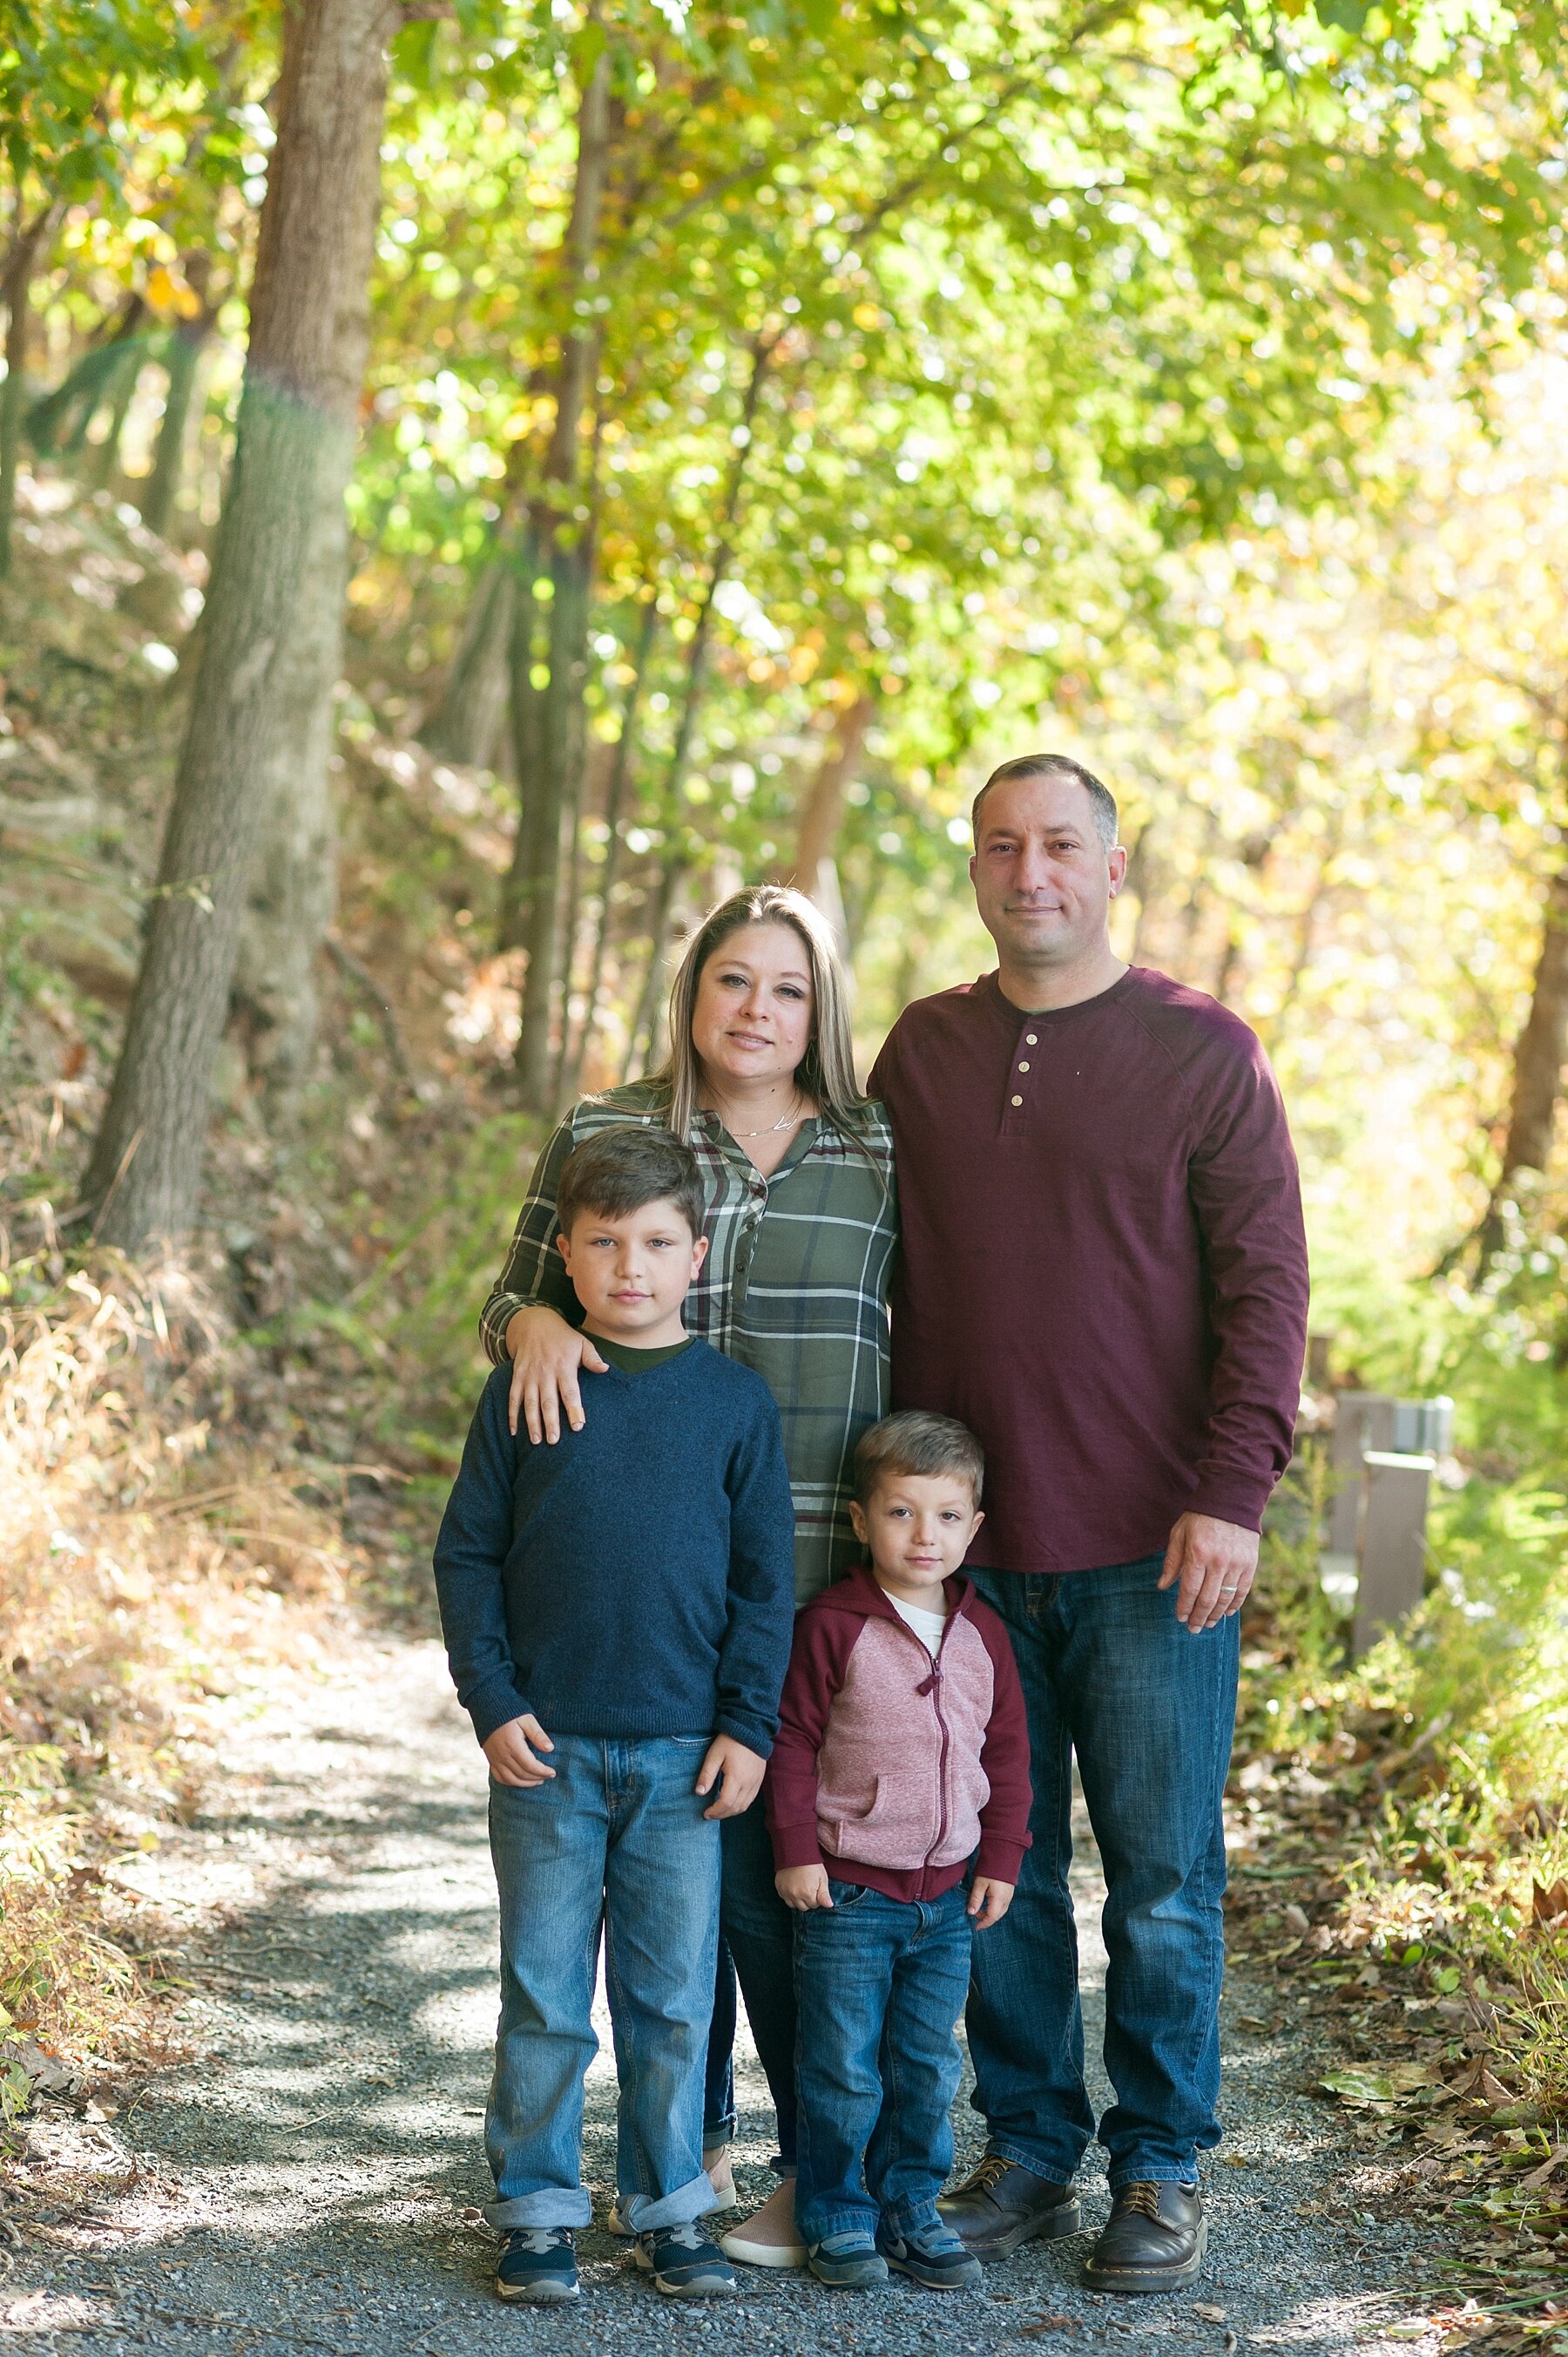 Wendy Zook Photography | Frederick MD Family photographer, family photos in the fall, Frederick family photos, Maryland family photographer, Maryland family photos, fall family portraits, Frederick Maryland family photos